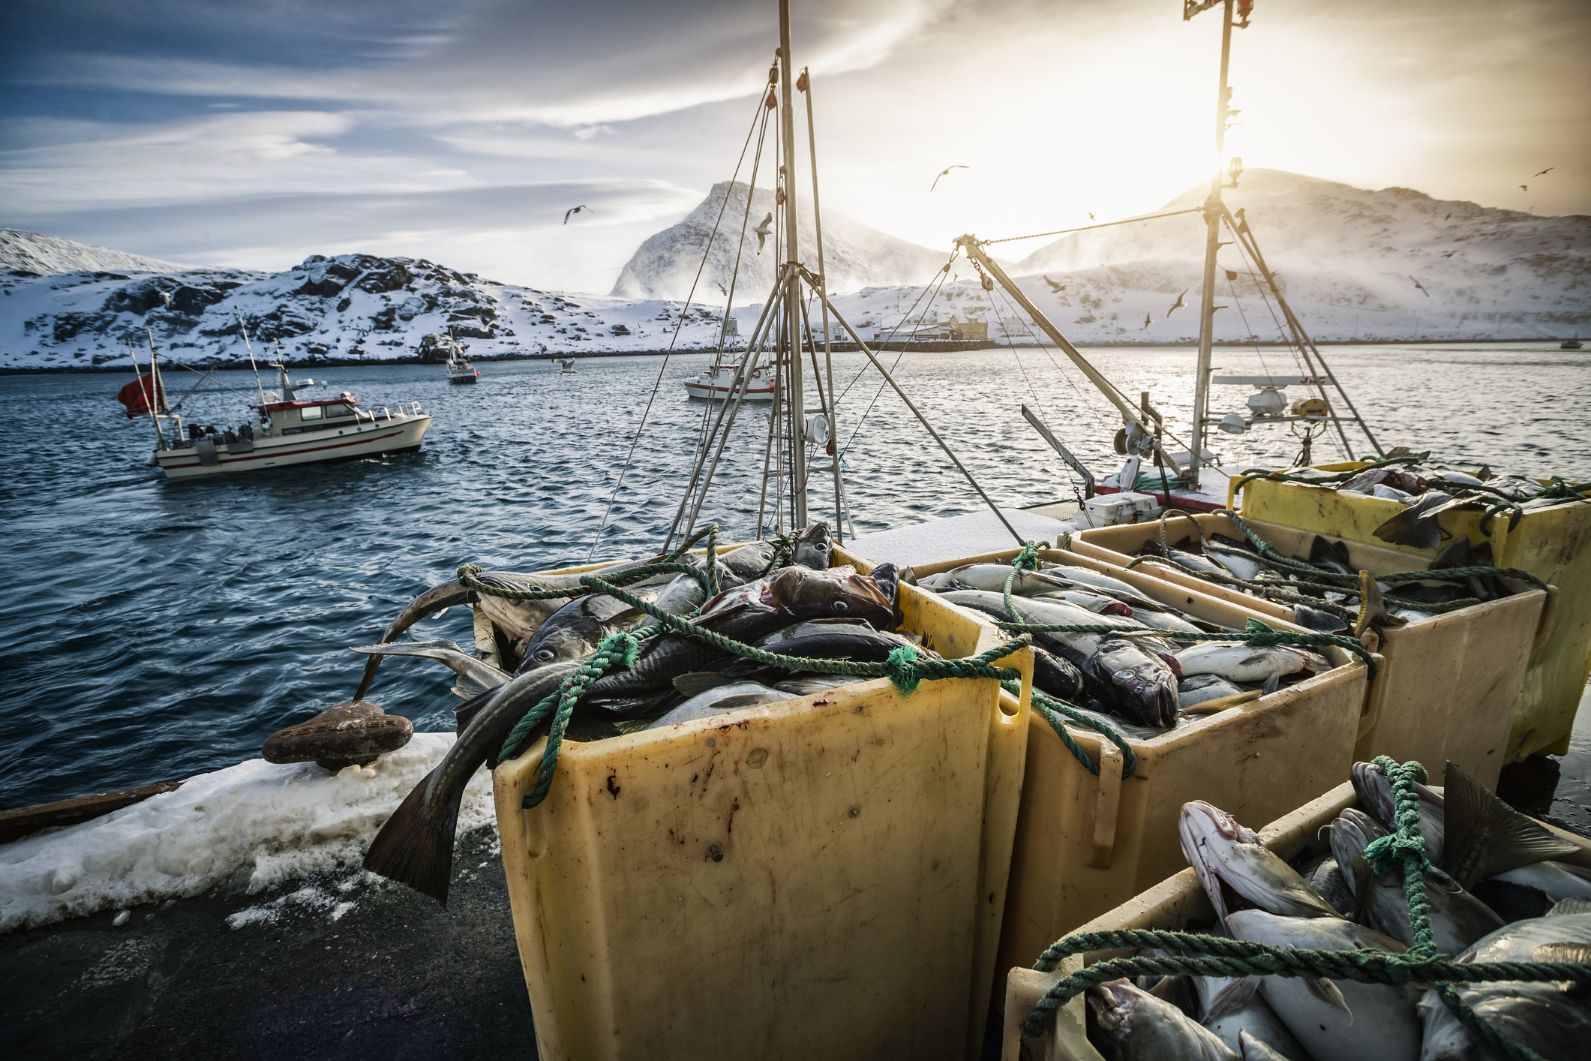 Fishing is one of the primary reasons the Lofoten Islands have been inhabited for so long